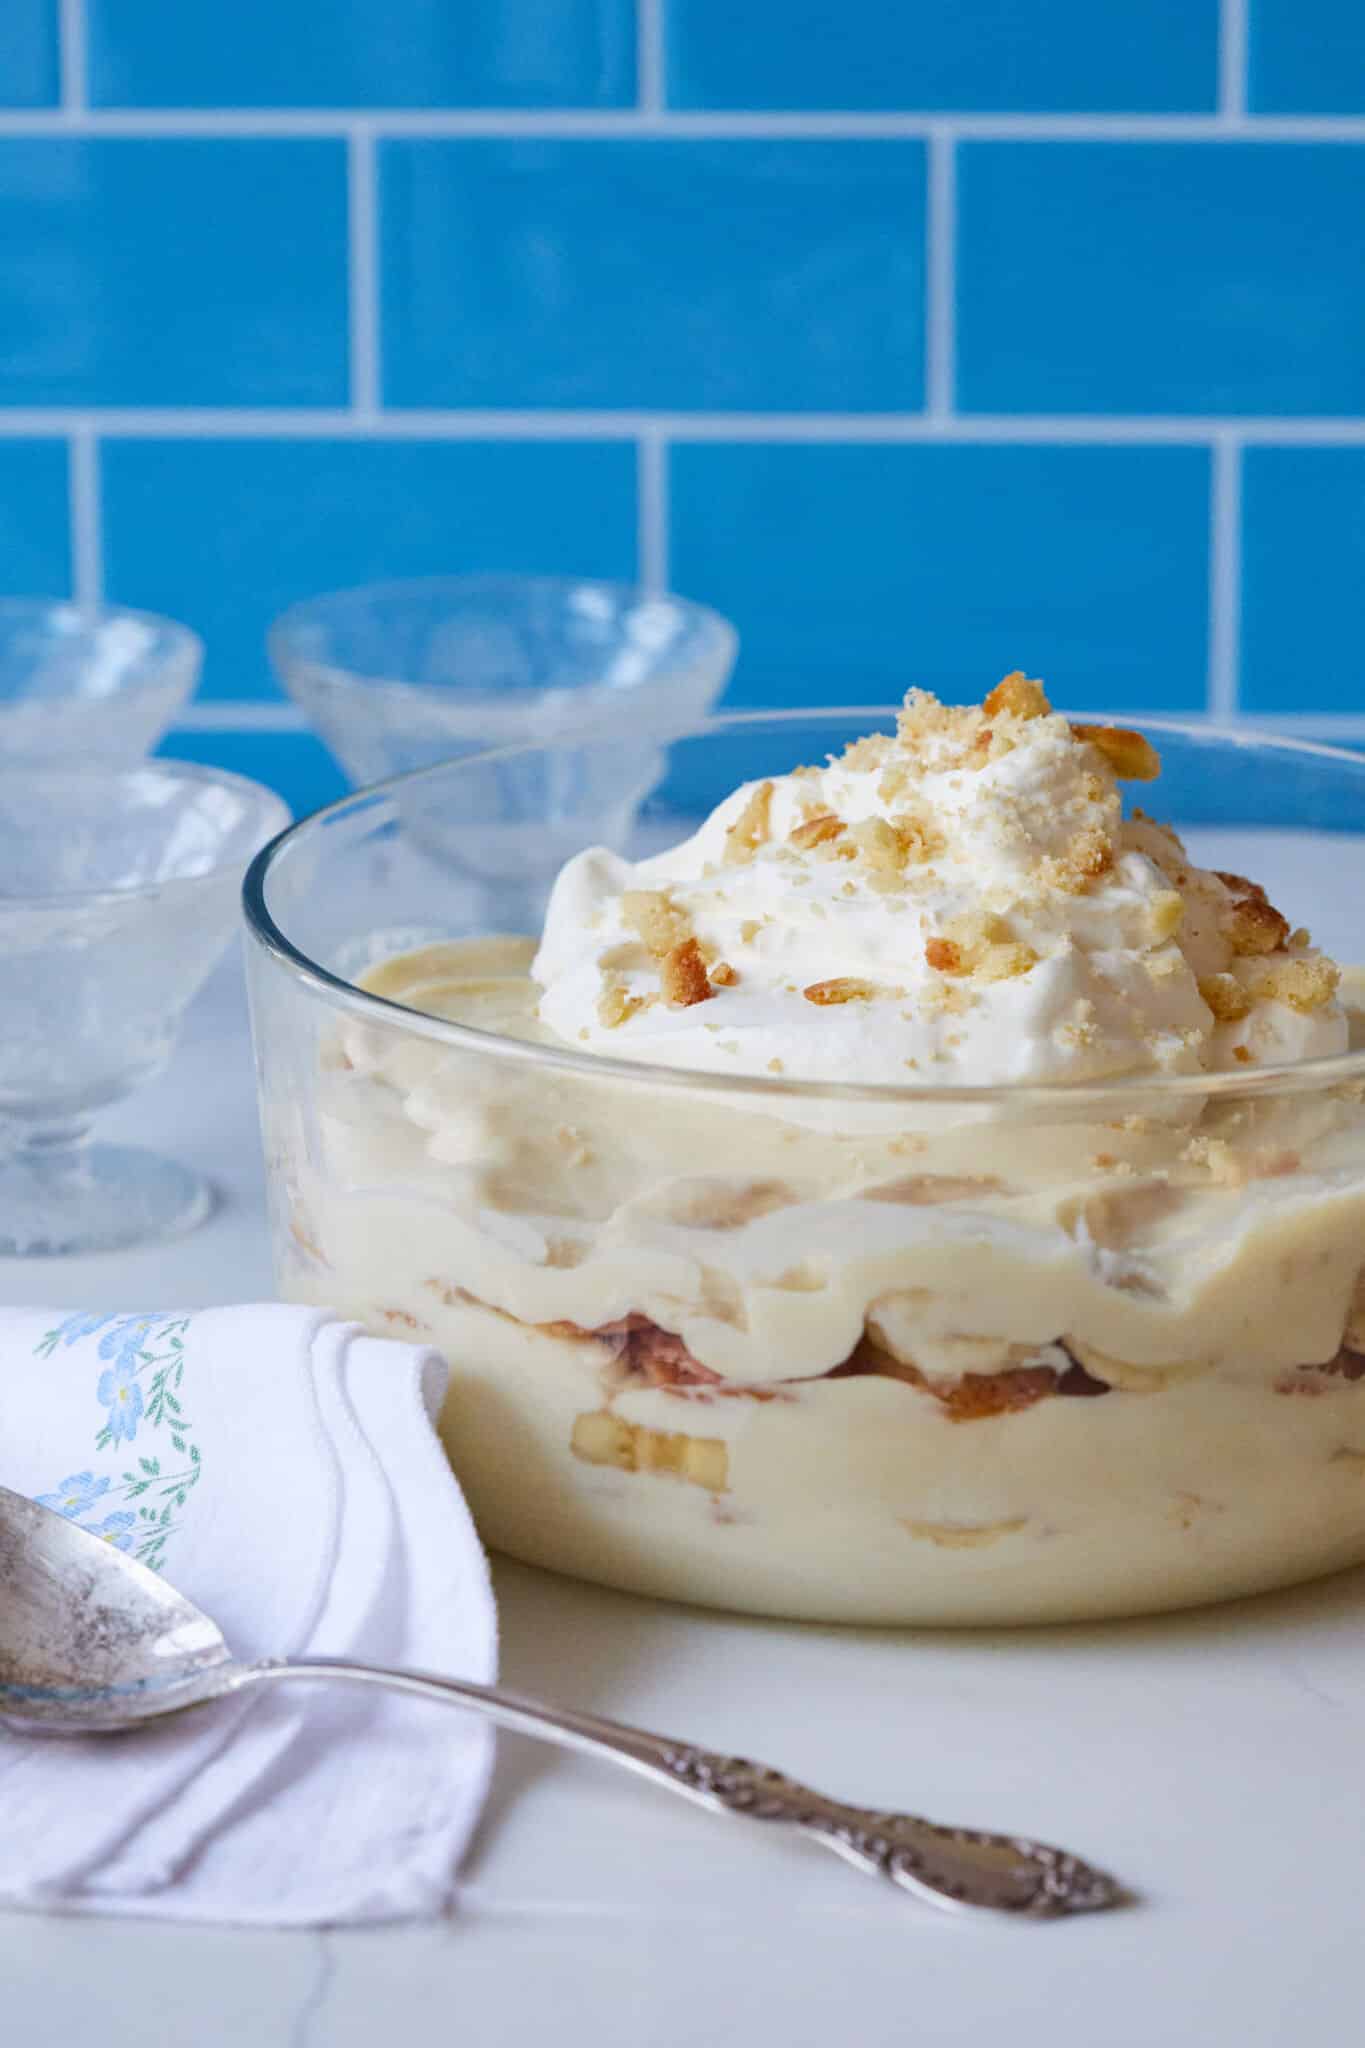 Microwave Banana Pudding Recipe presented in glass bowl